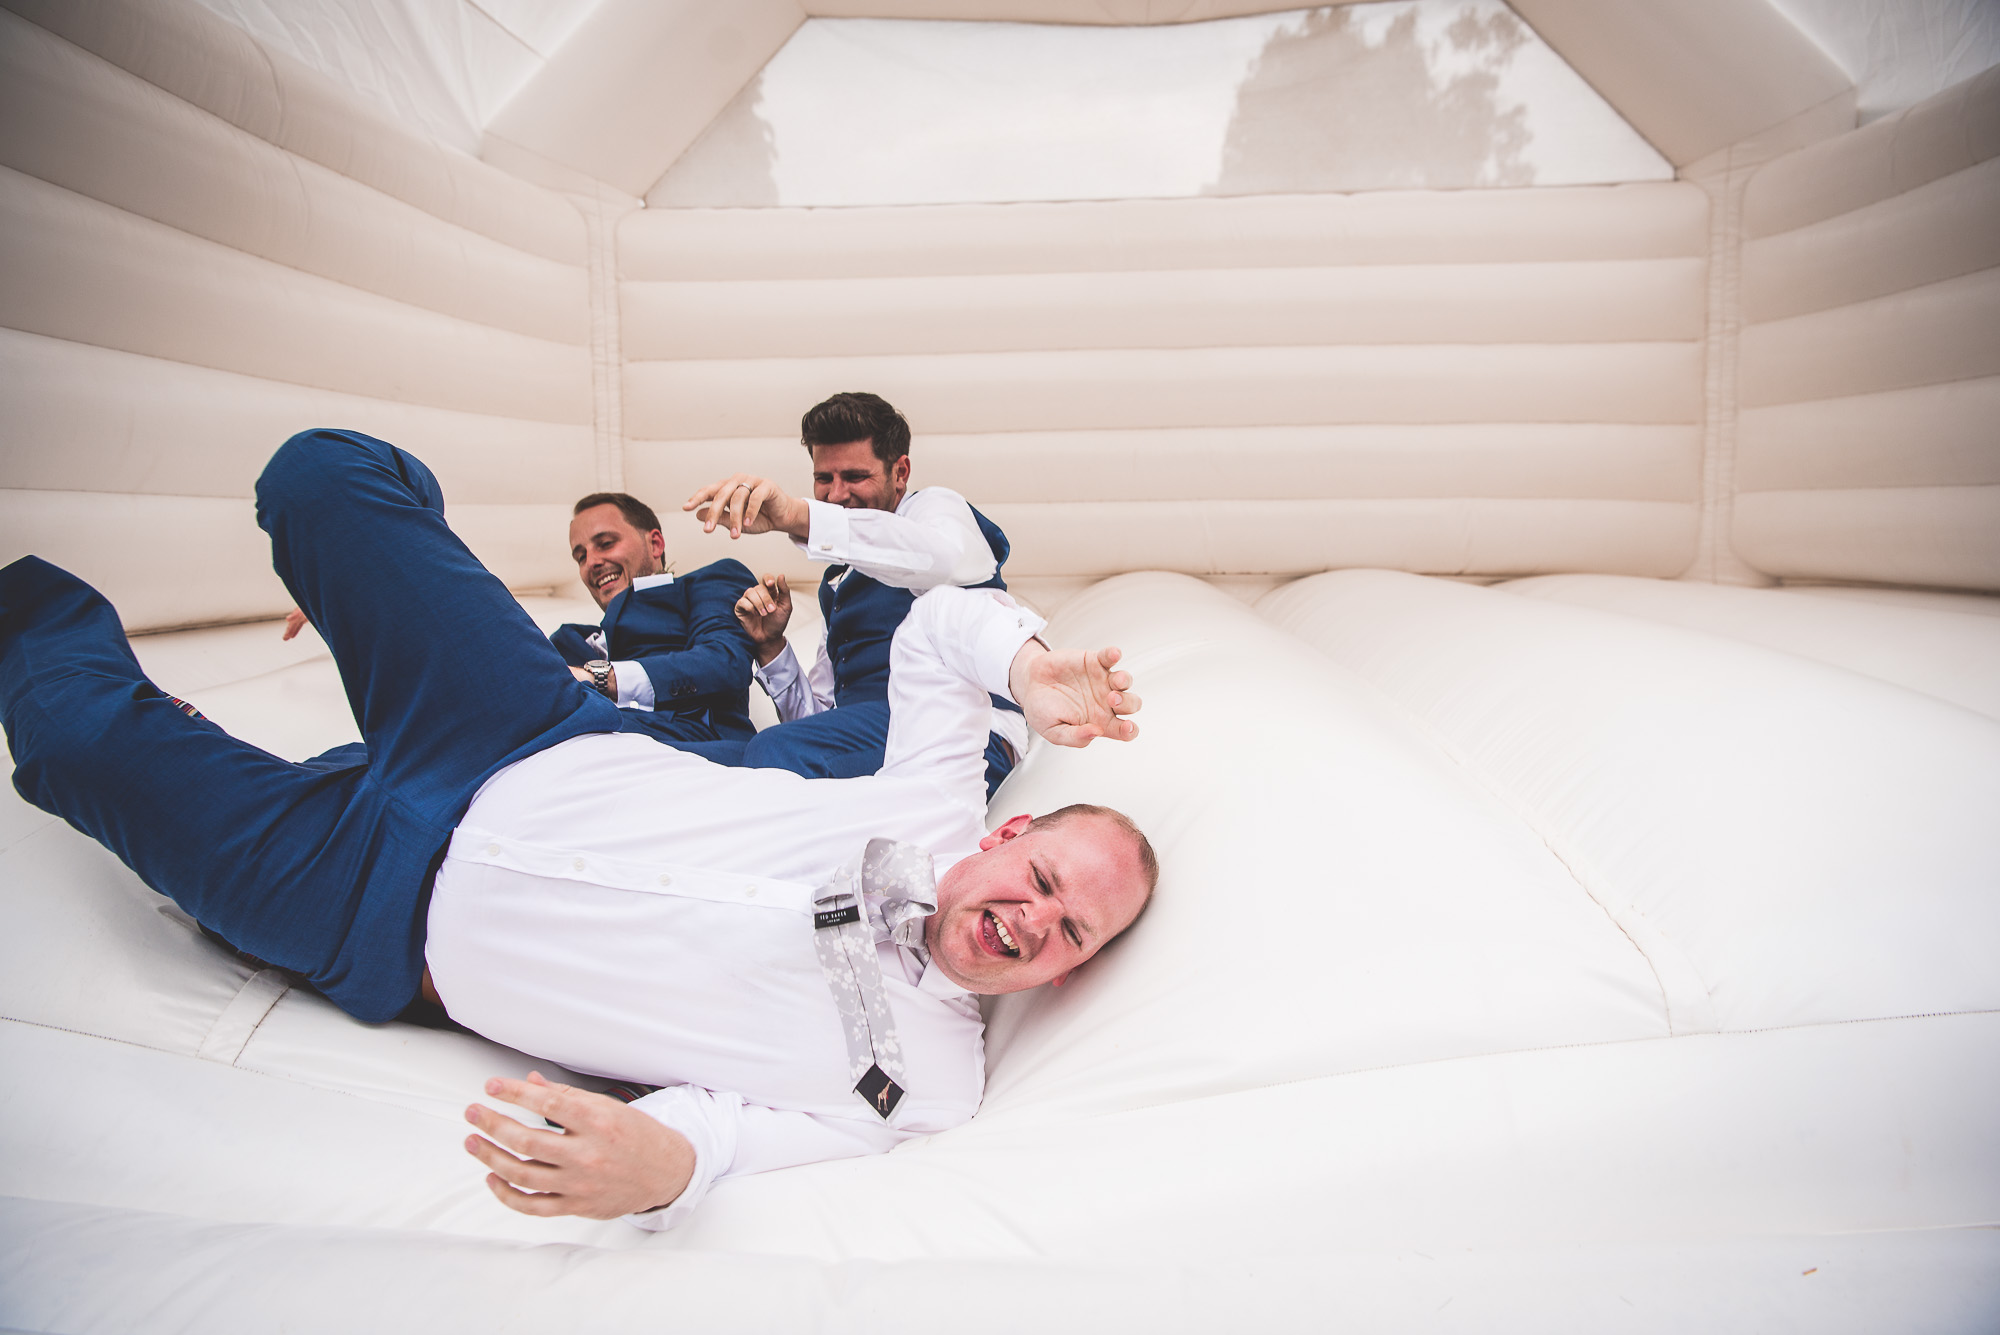 Groomsmen lounging on an inflatable bouncer at a wedding celebration.